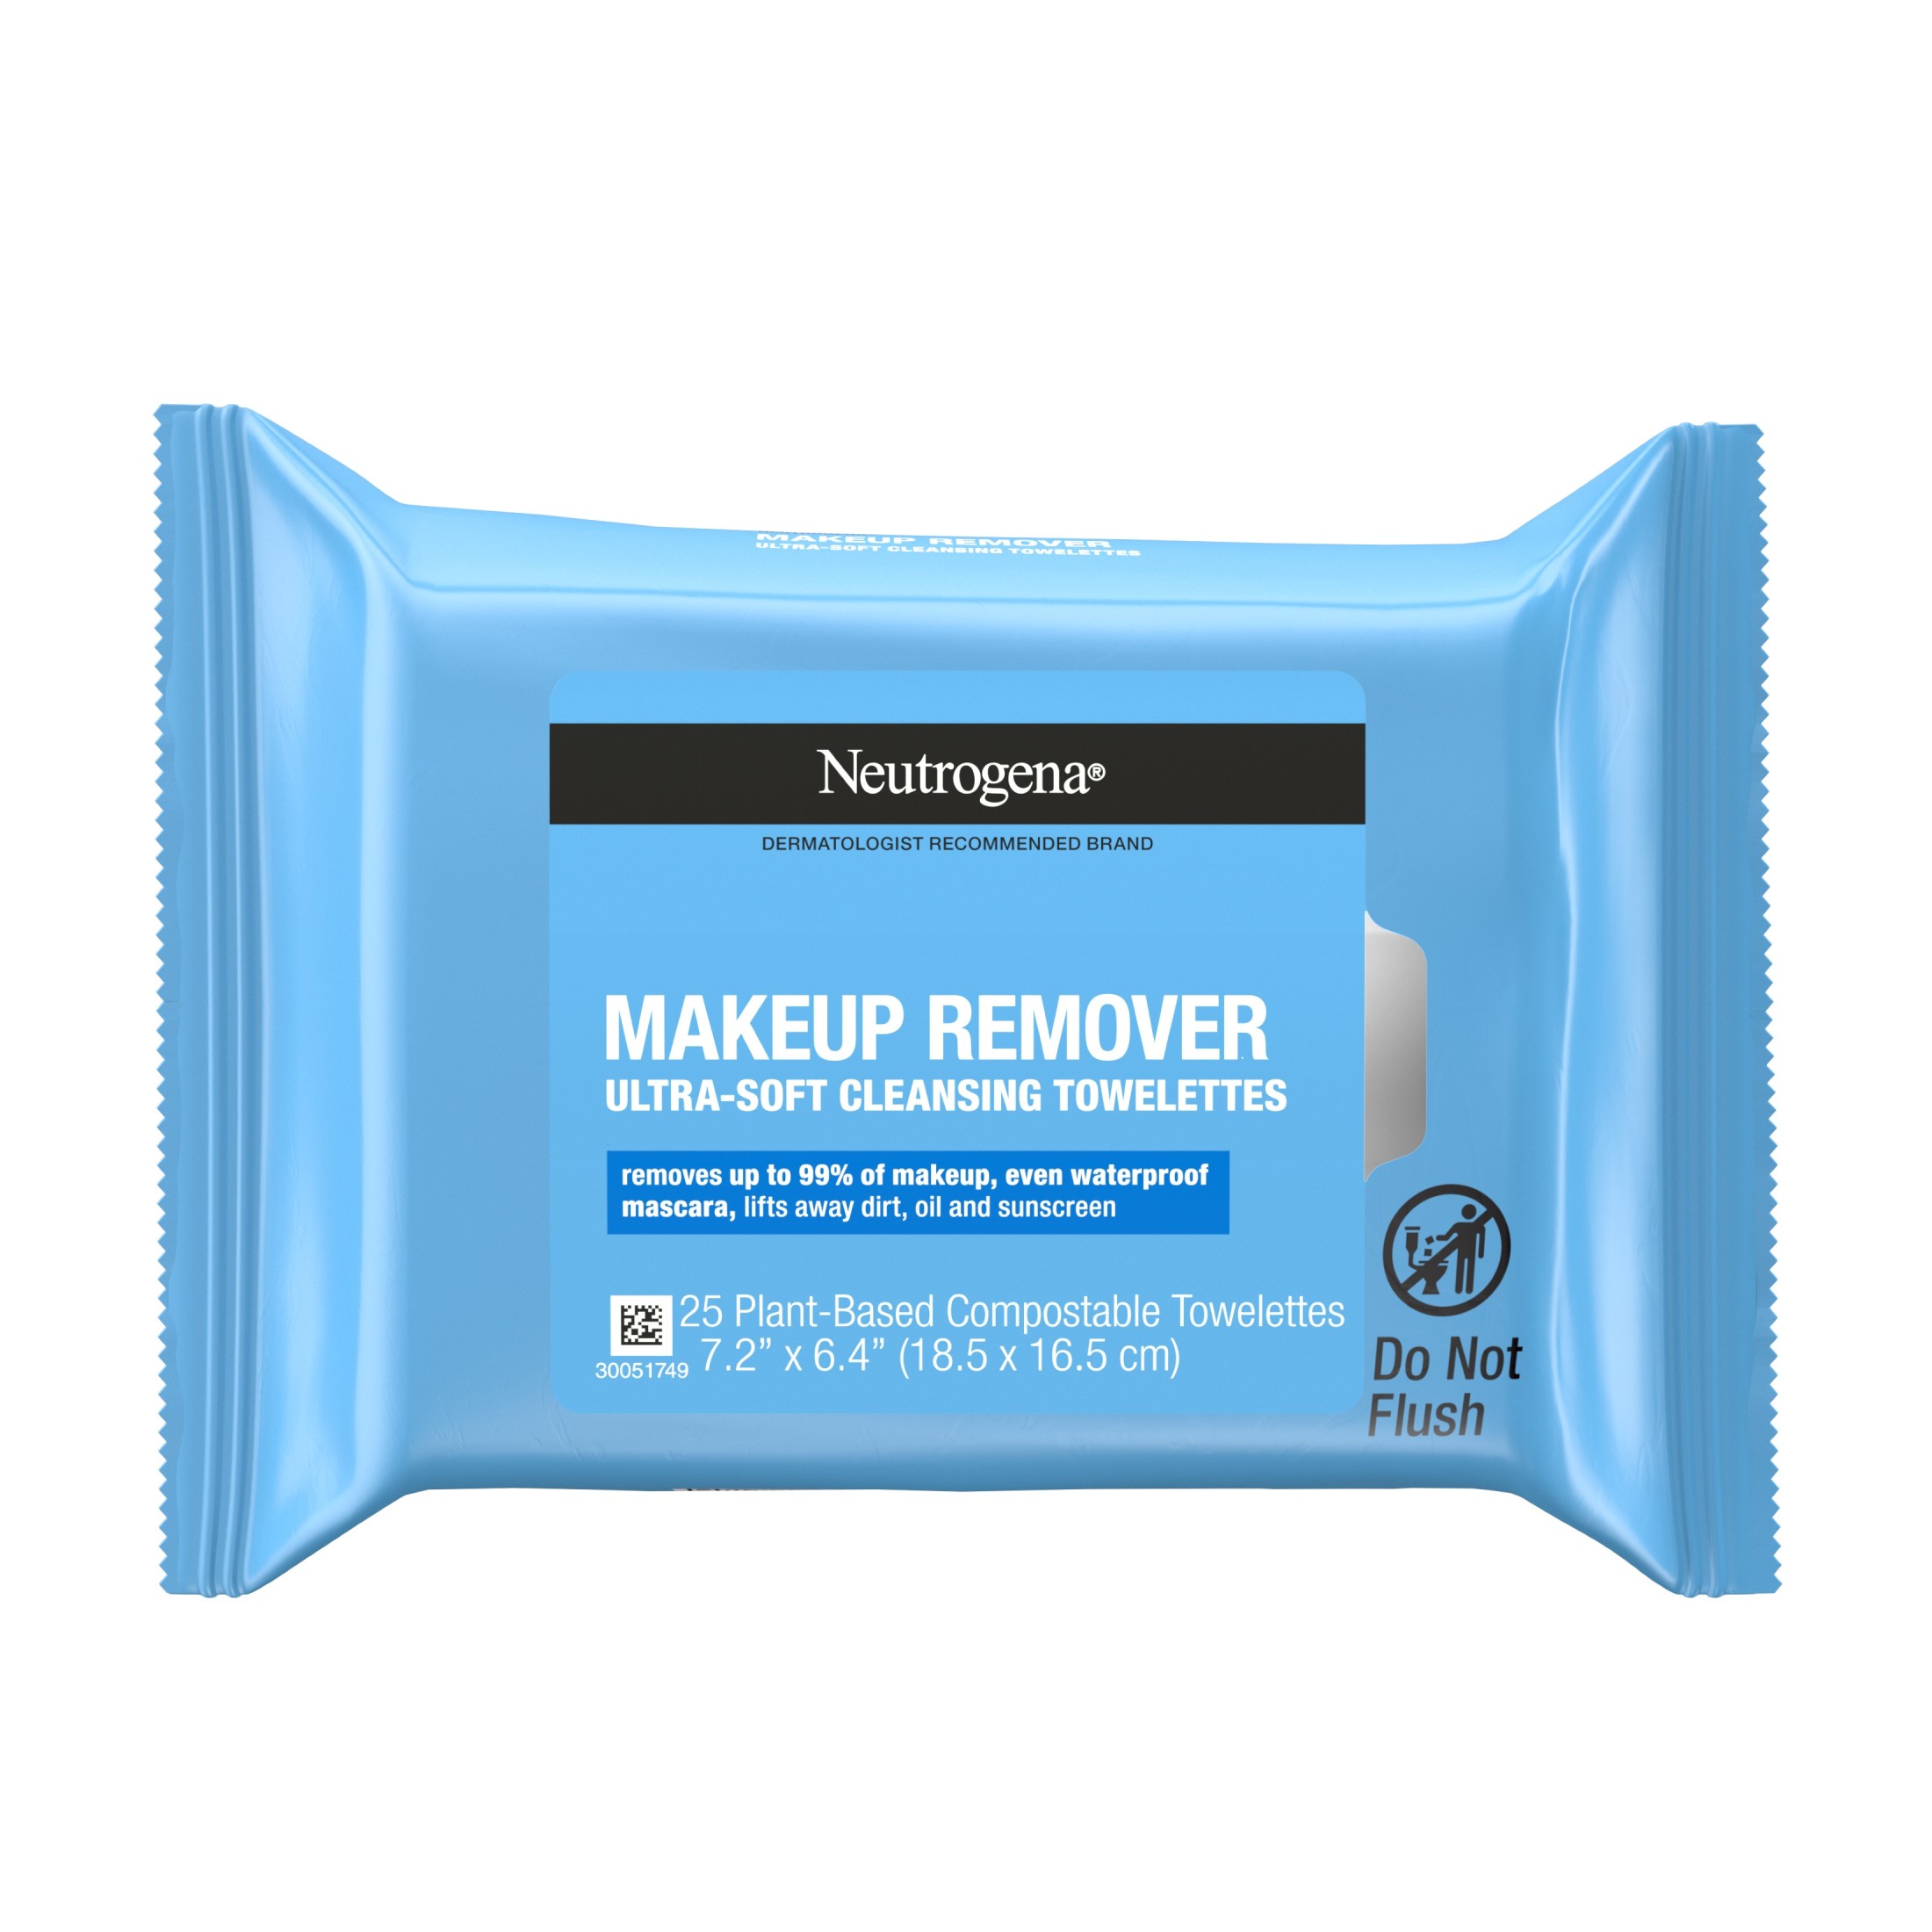 Neutrogena Makeup Remover Wipes and Face Cleansing Towelettes, 25 Ct - image 1 of 8